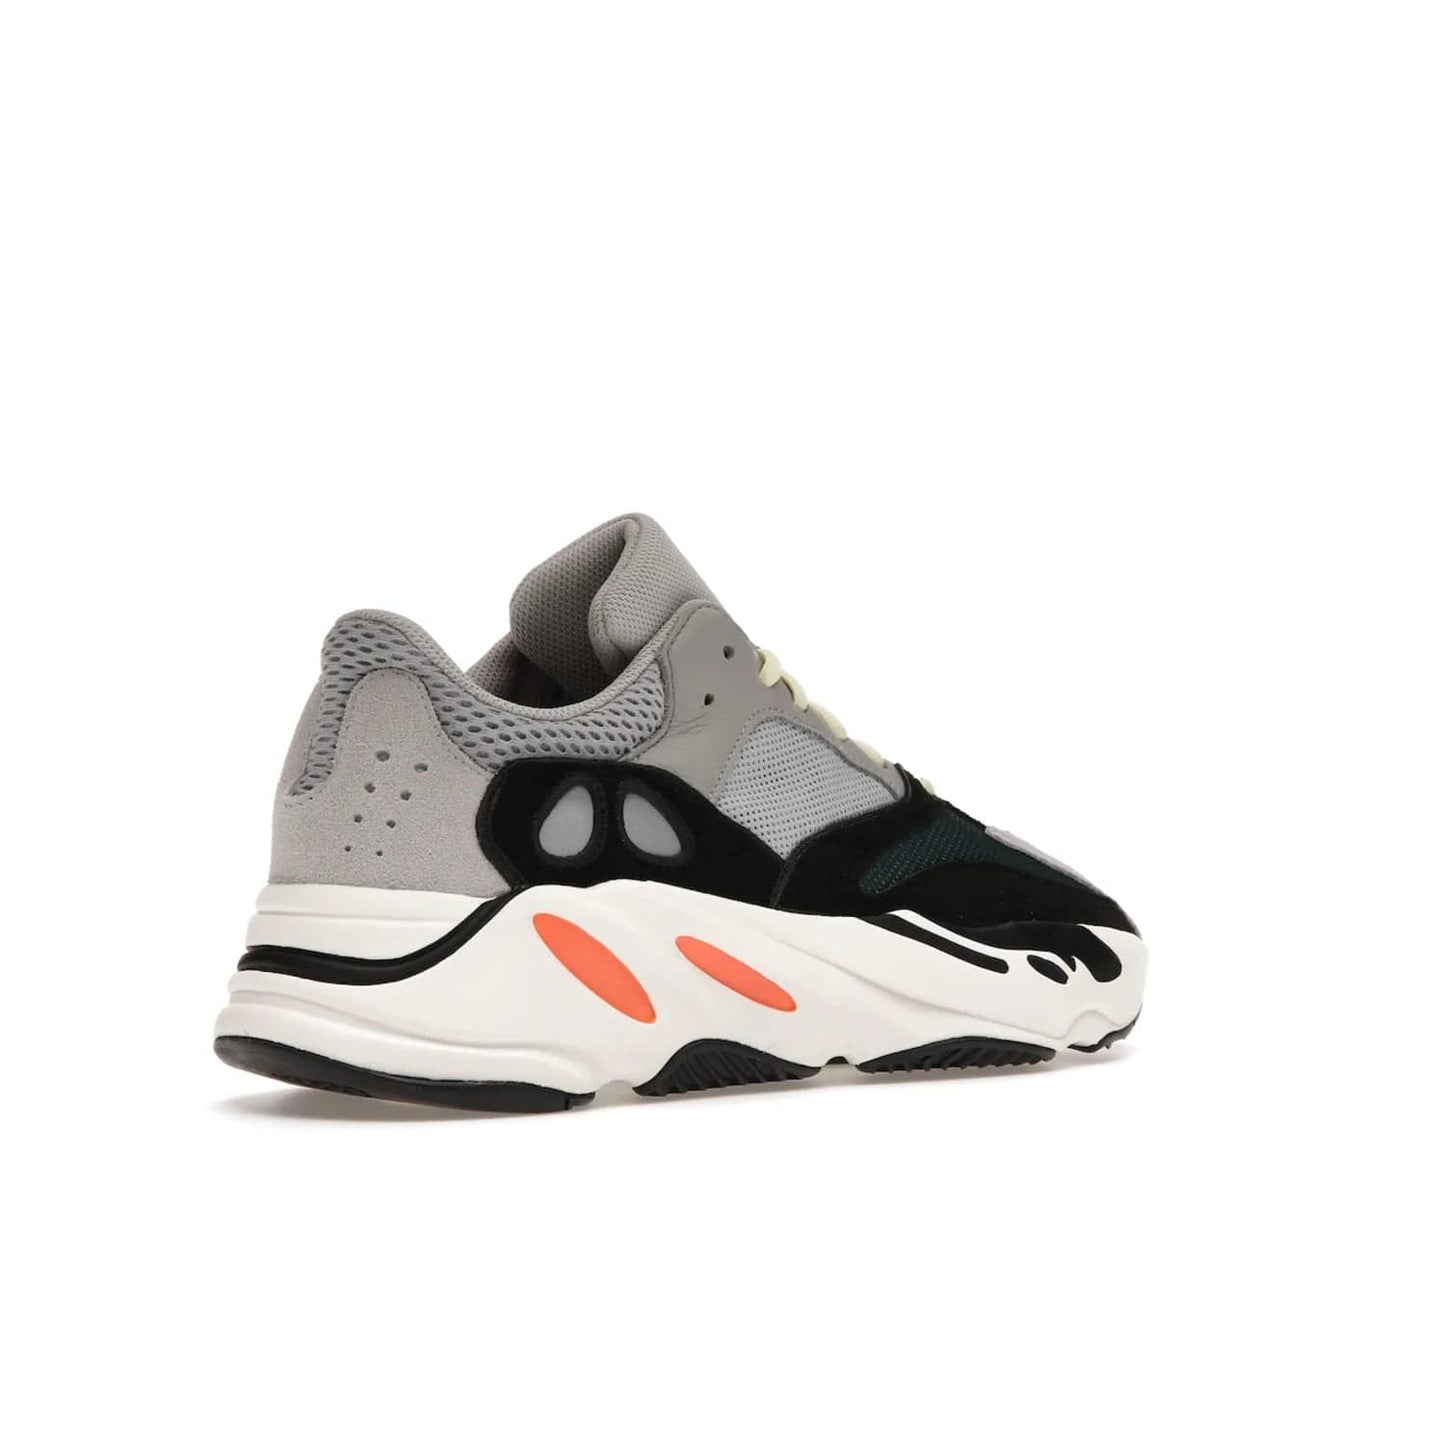 adidas Yeezy Boost 700 Wave Runner - Image 33 - Only at www.BallersClubKickz.com - Shop the iconic adidas Yeezy Boost 700 Wave Runner. Featuring grey mesh and leather upper, black suede overlays, teal mesh underlays, and signature Boost sole. Be bold & make a statement.